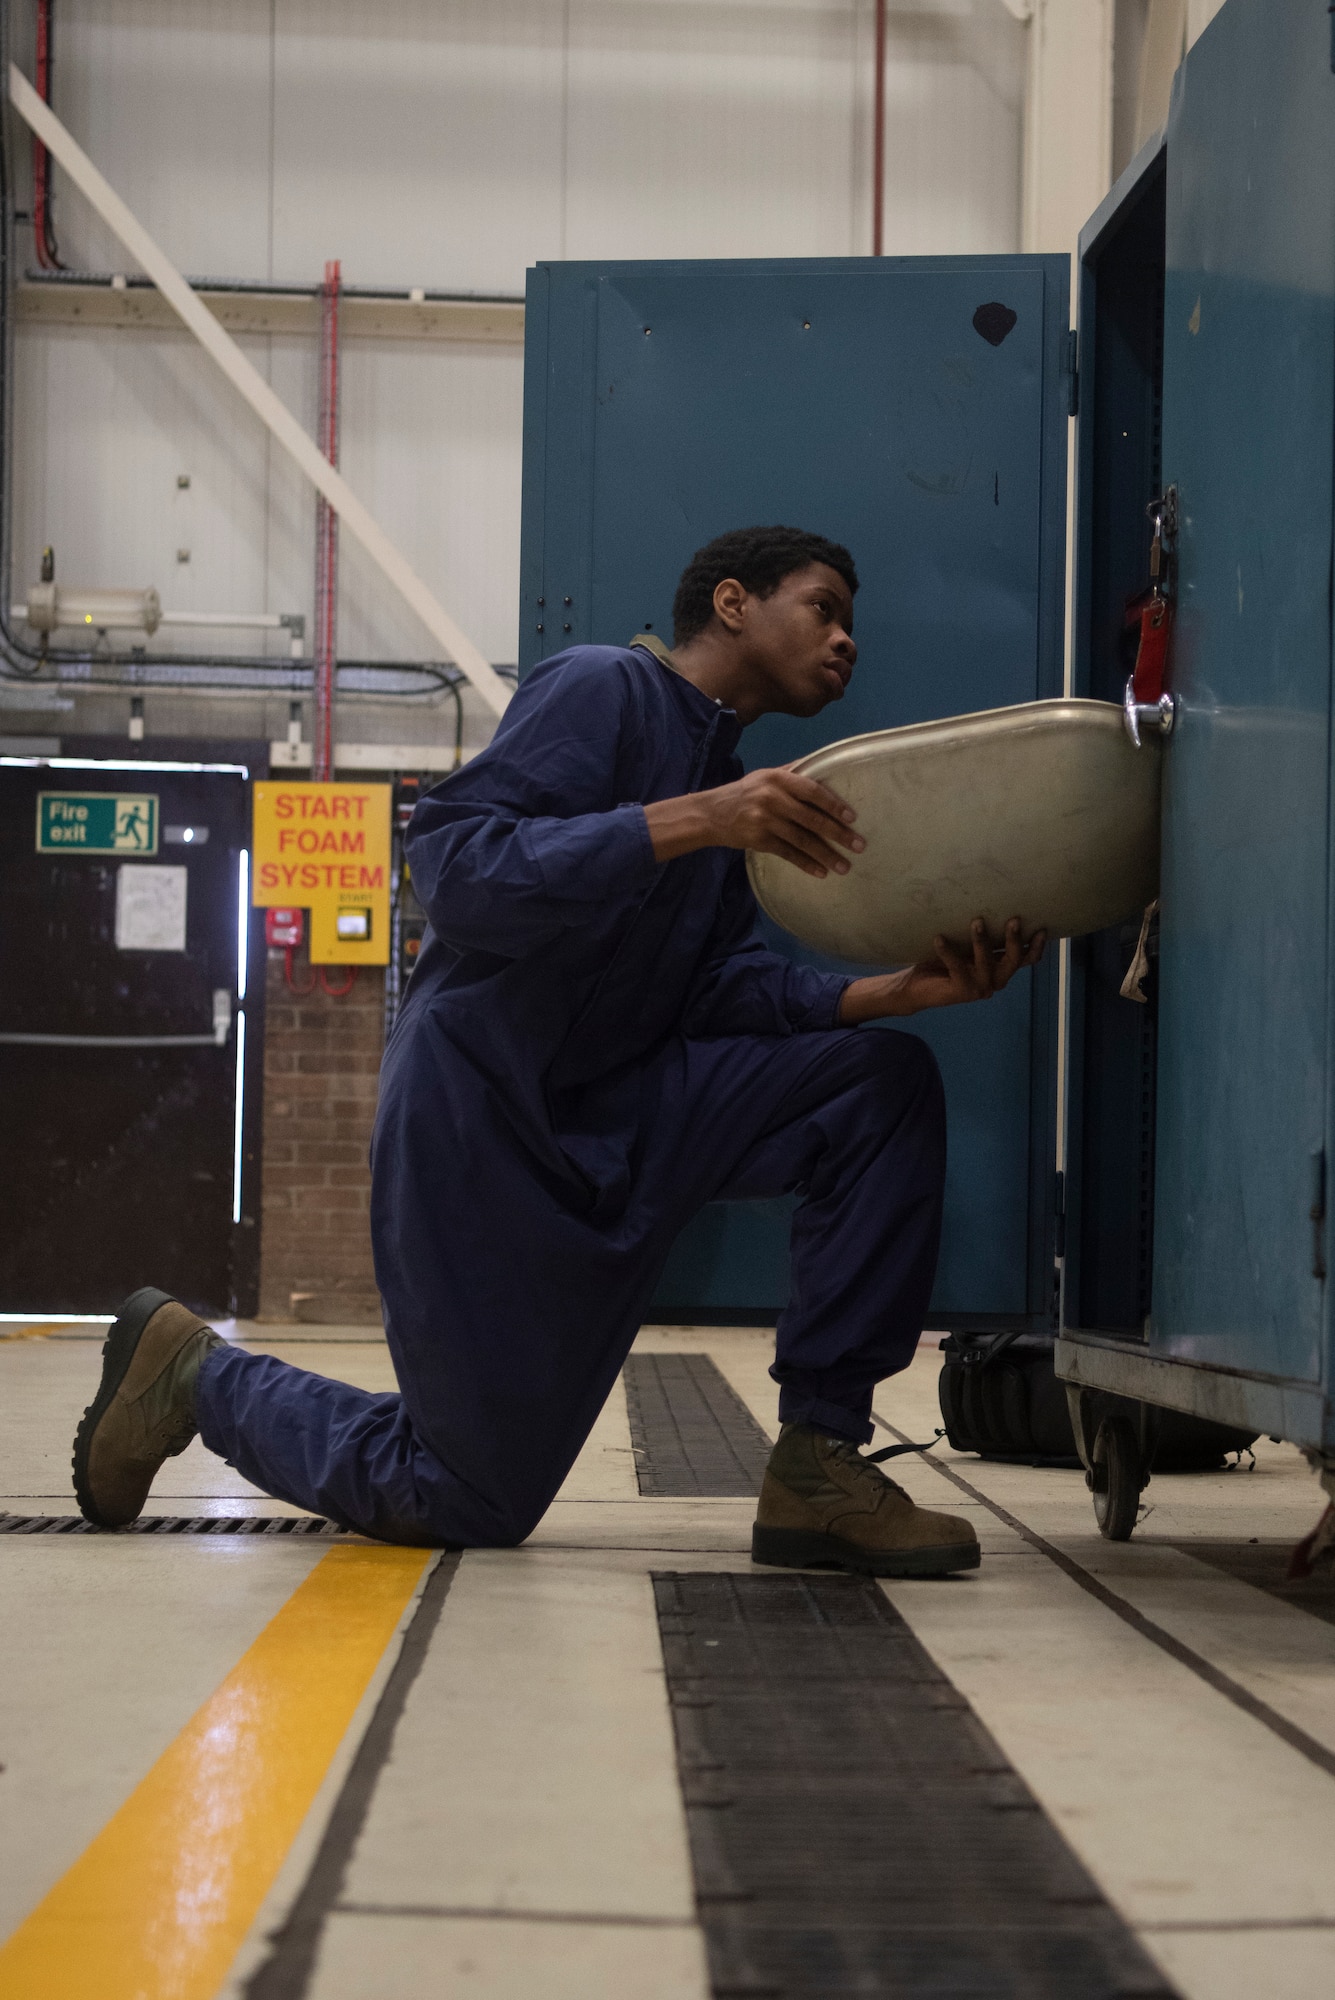 Airman 1st Class Dezmond Ross, 100th Maintenance Squadron fuel systems repair apprentice, deposits a KC-135 access door inside the parts holding bin at RAF Mildenhall, England, May 27, 2020. Parts removed from aircraft are stored in a specific location to maintain their accountability. (U.S. Air Force photo by Airman 1st Class Joseph Barron)